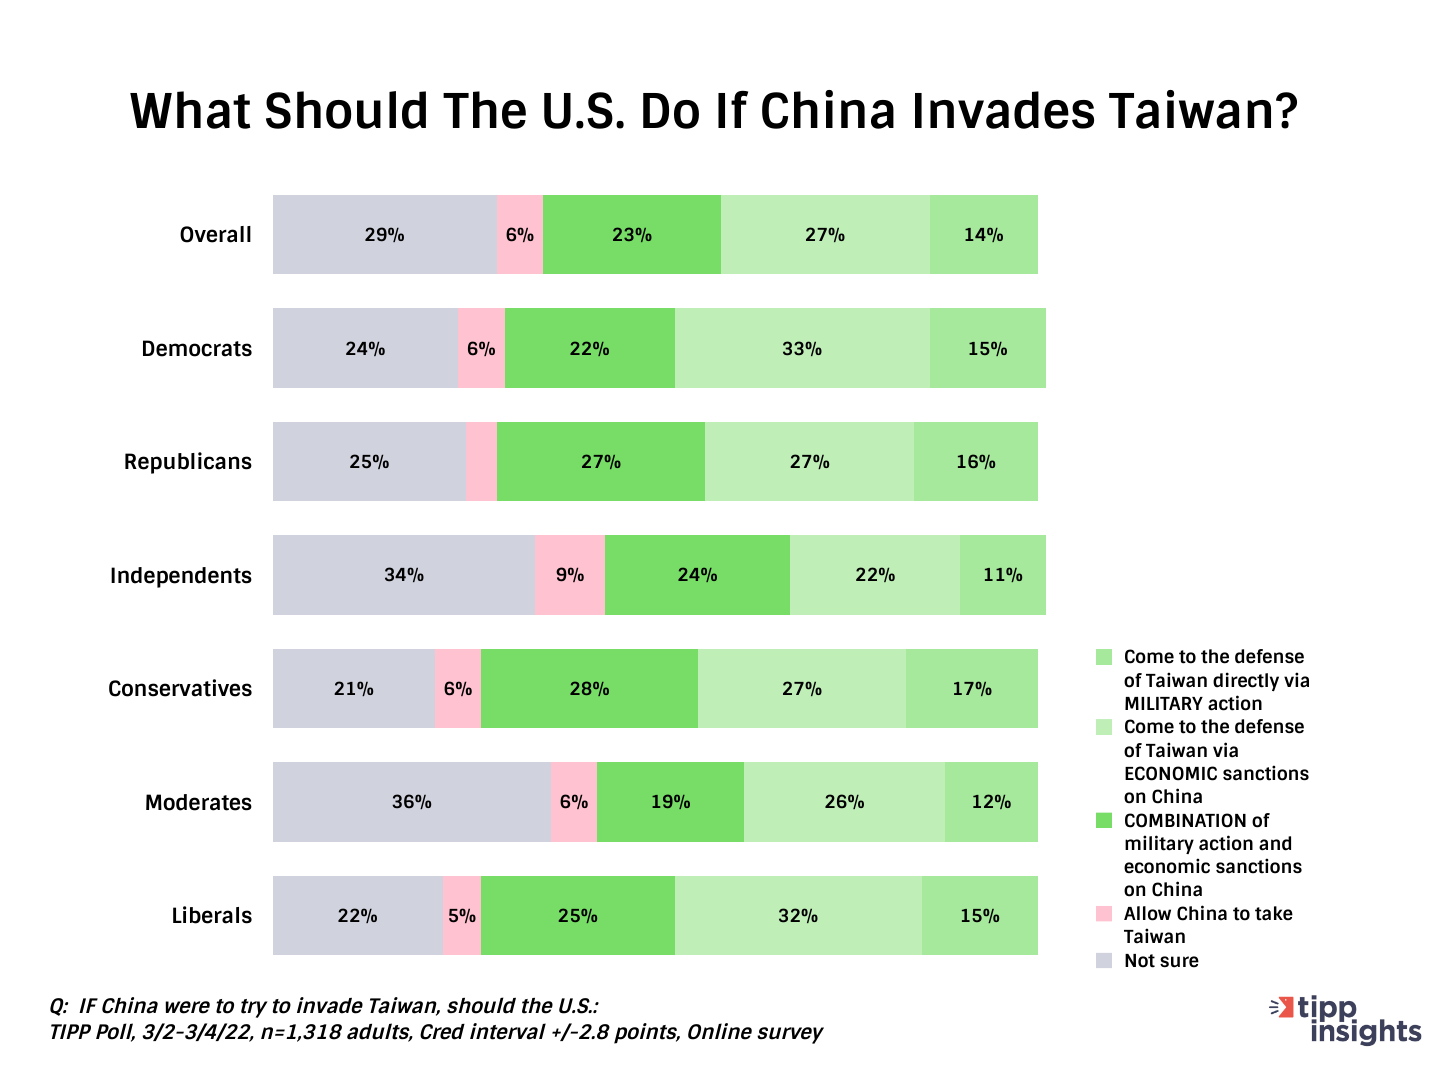 TIPP Poll Results: What should the U.S. do if China invades Taiwan?